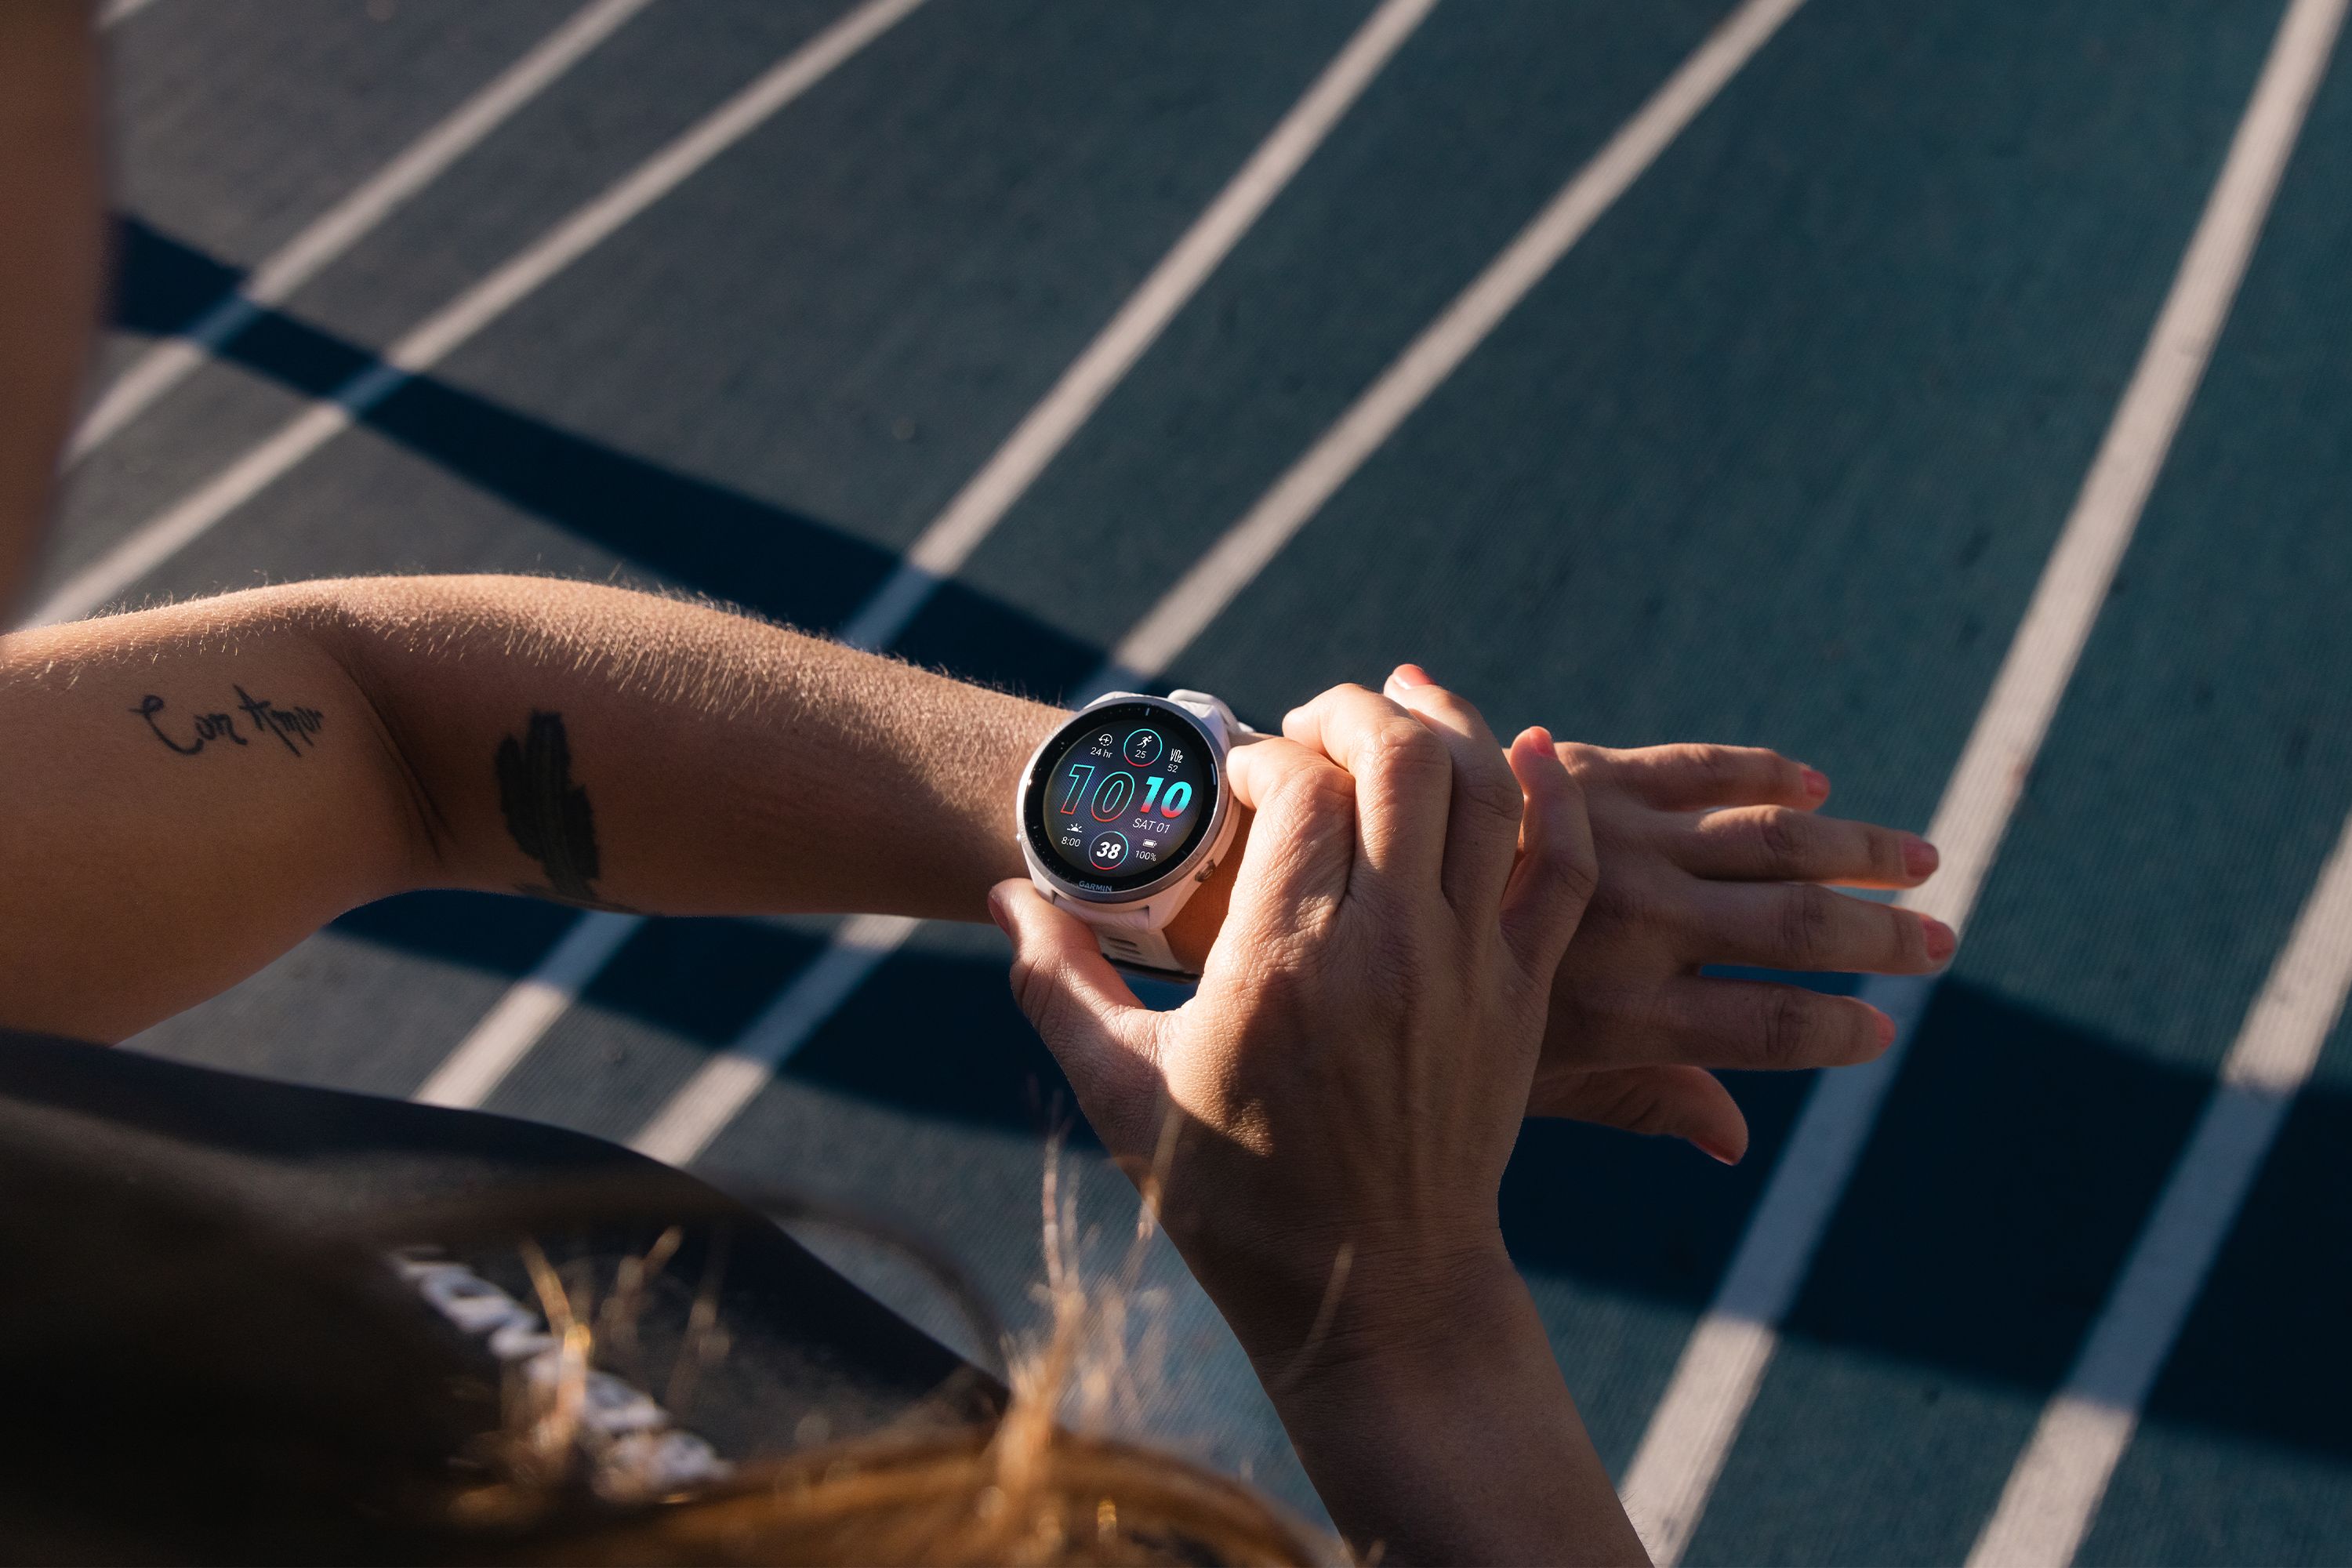 What To Know About Garmin's New Forerunner Running Watches